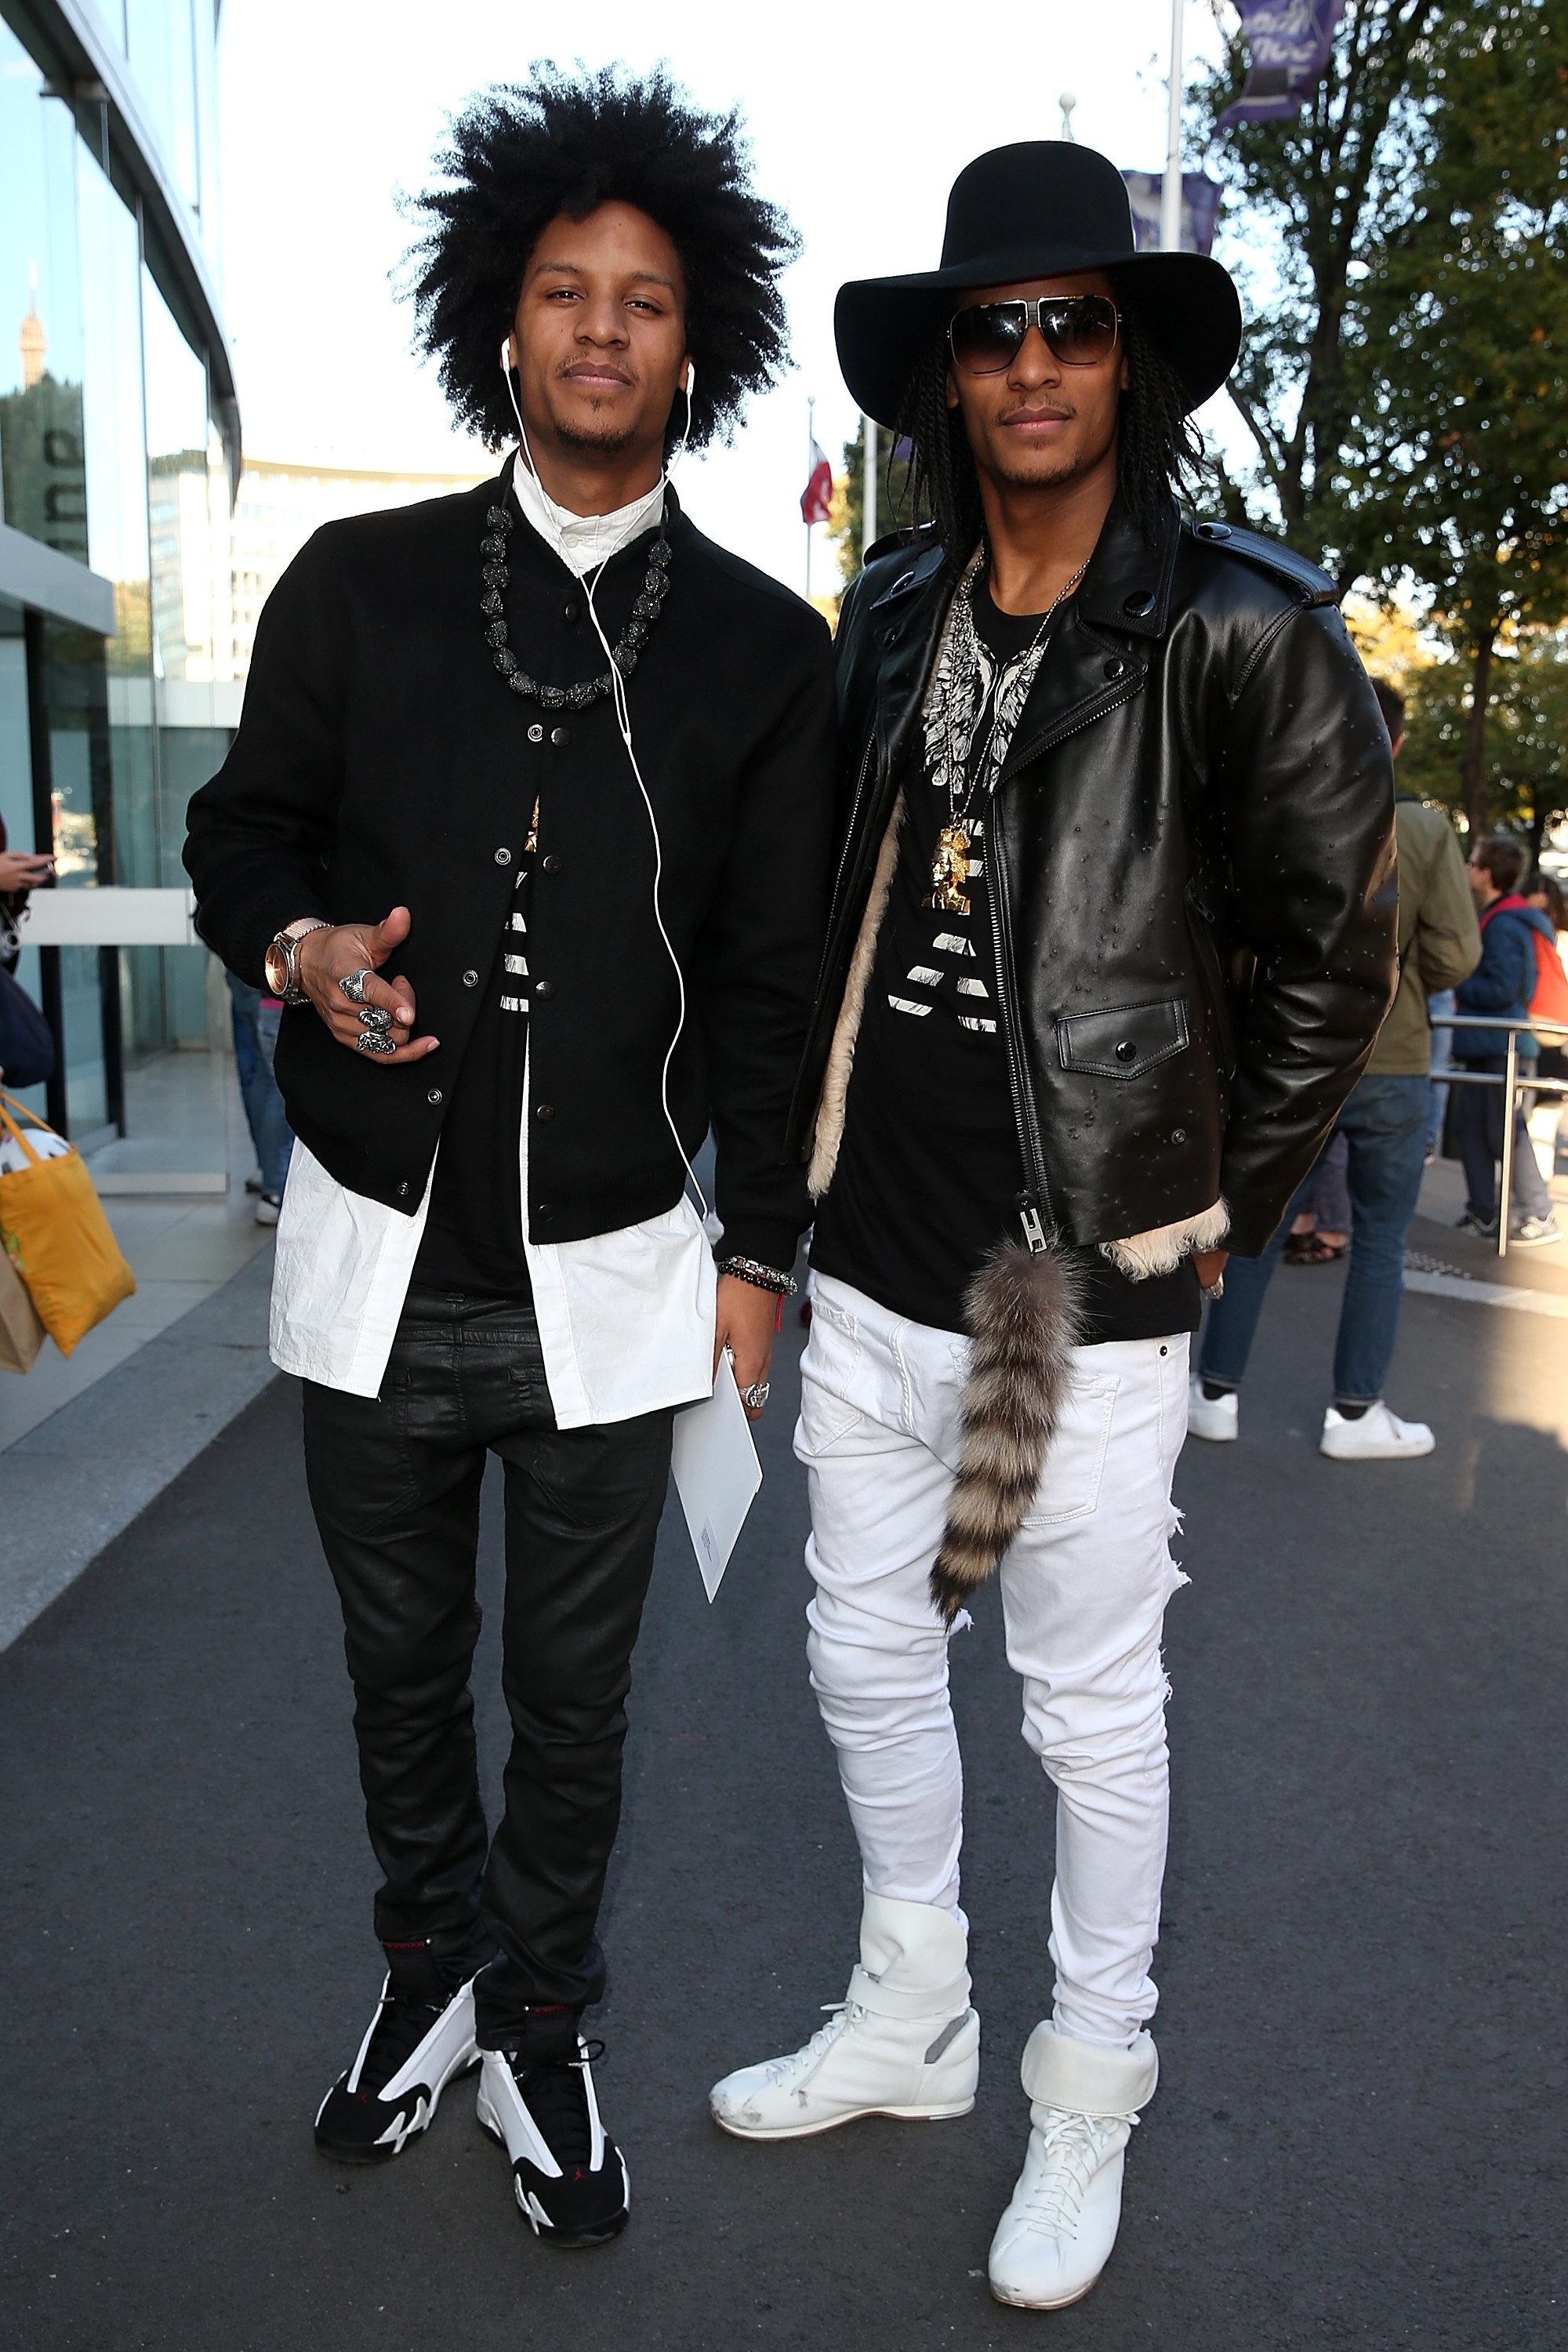 2000x3000 Les Twins - “Identical faces! Identical moves! There is not a doubt that